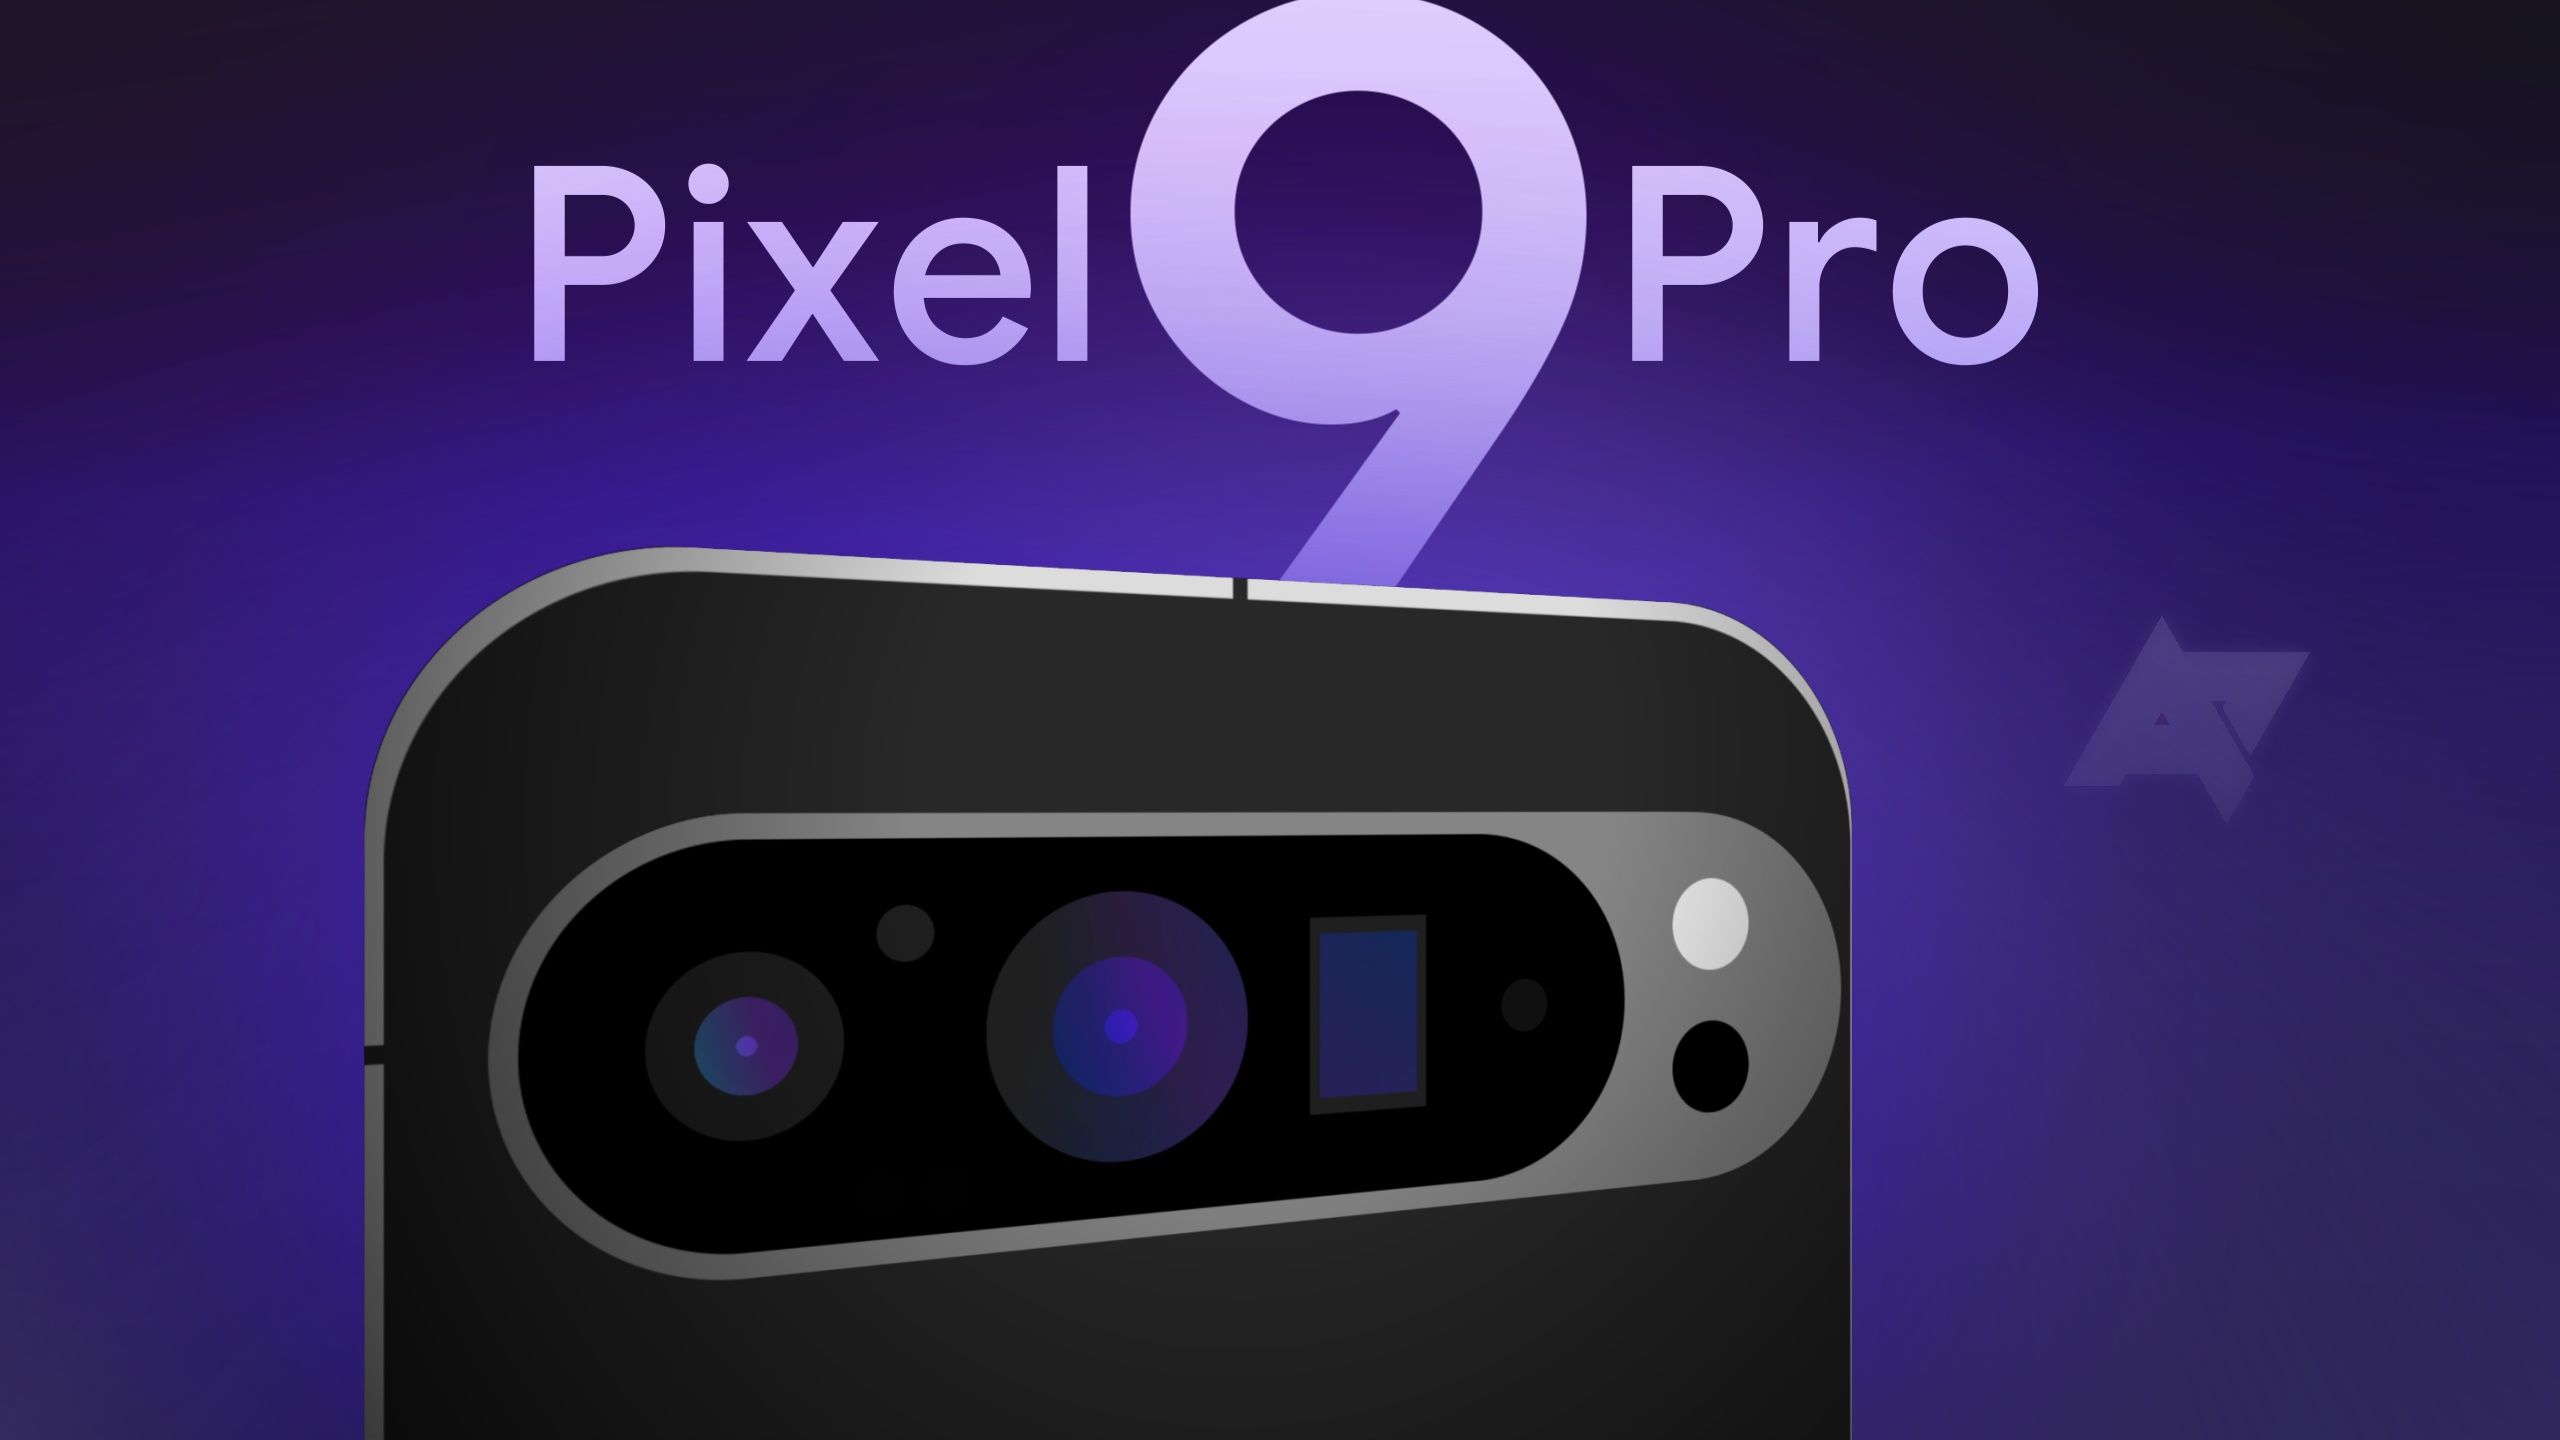 A graphic showing the Pixel 9 Pro over a purple background